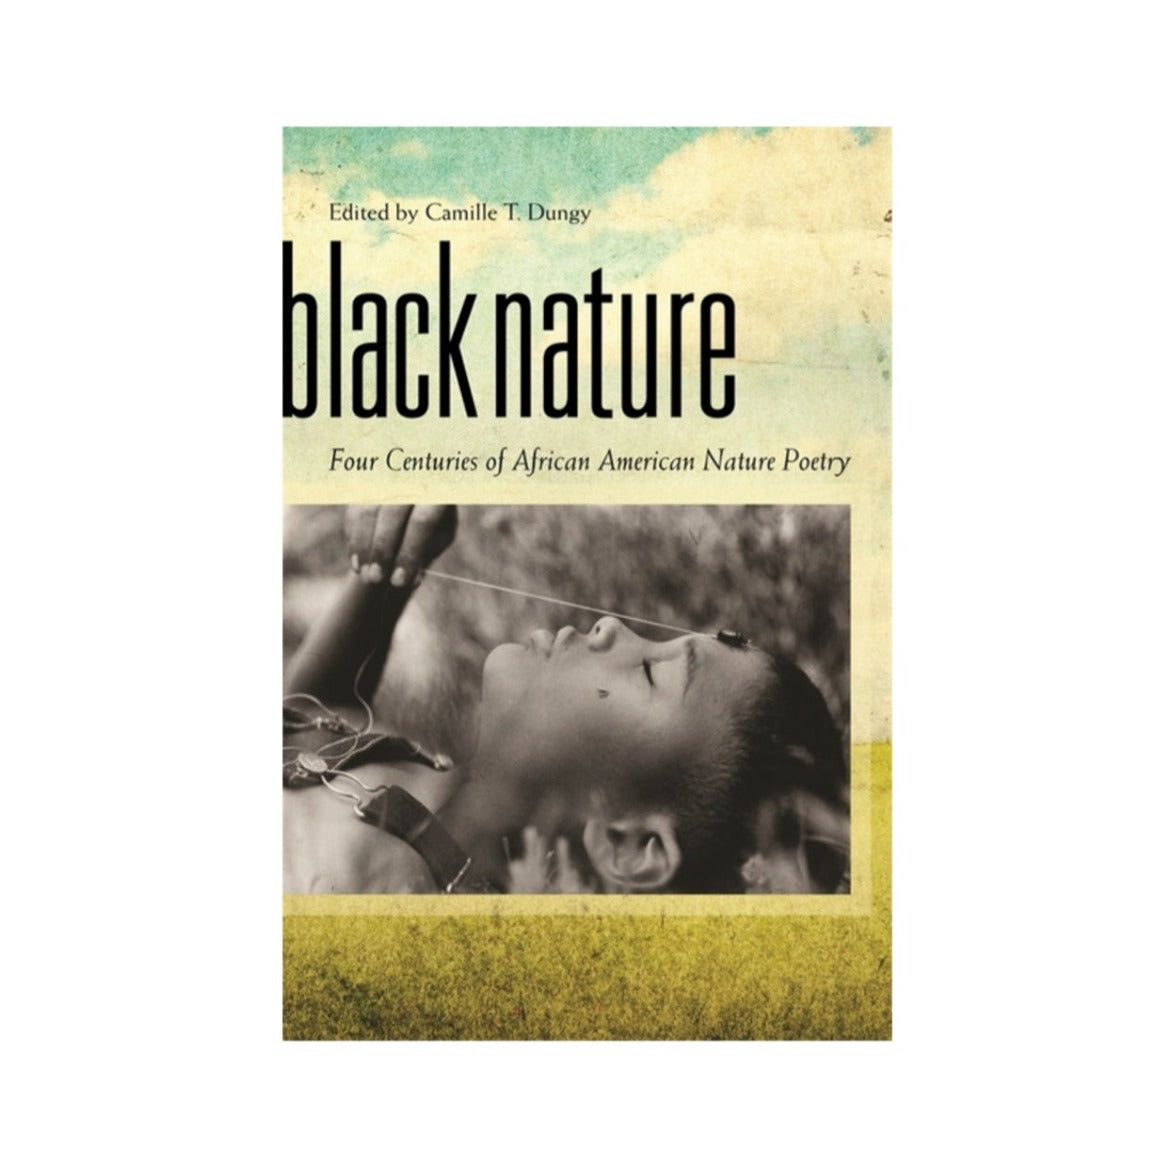 Black Nature by Camille T. Dungy